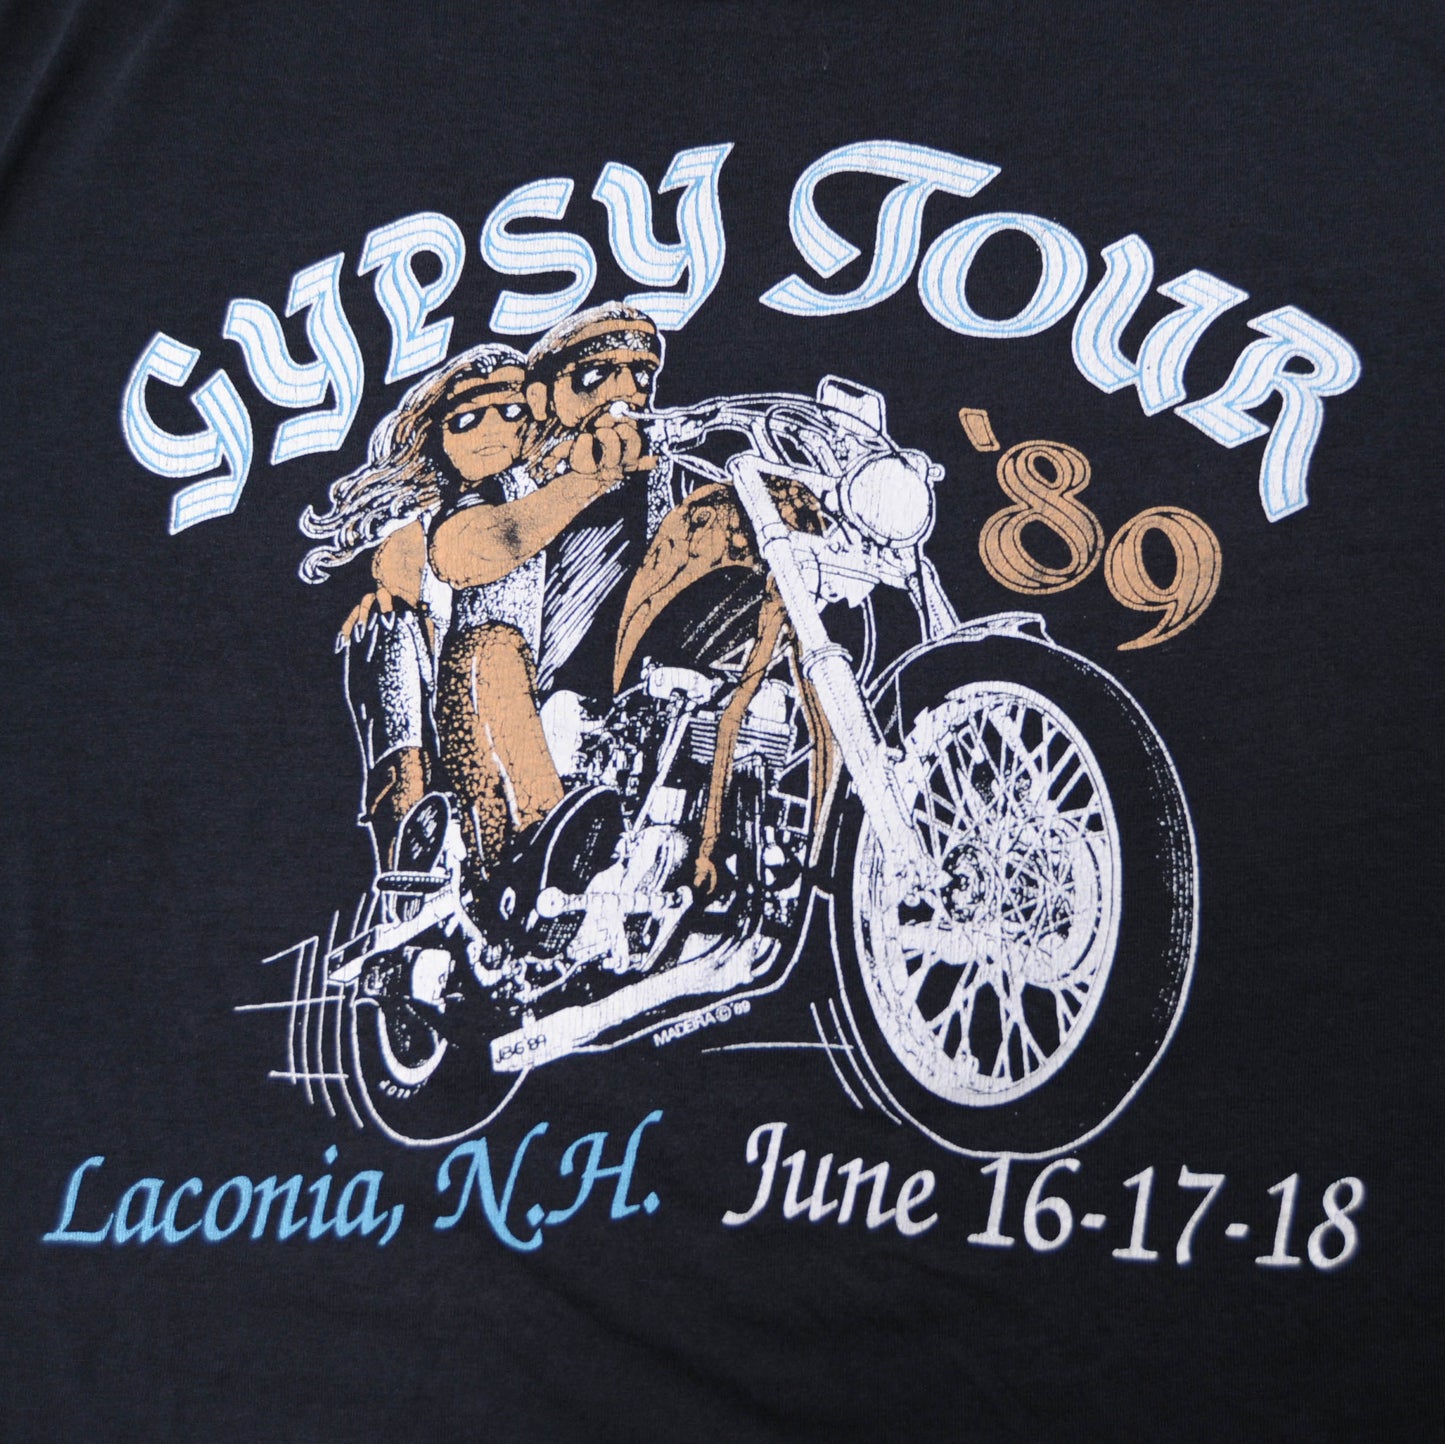 80's GYPSY TOUR 89 プリントTシャツ 黒 (XL)/A3097T-S